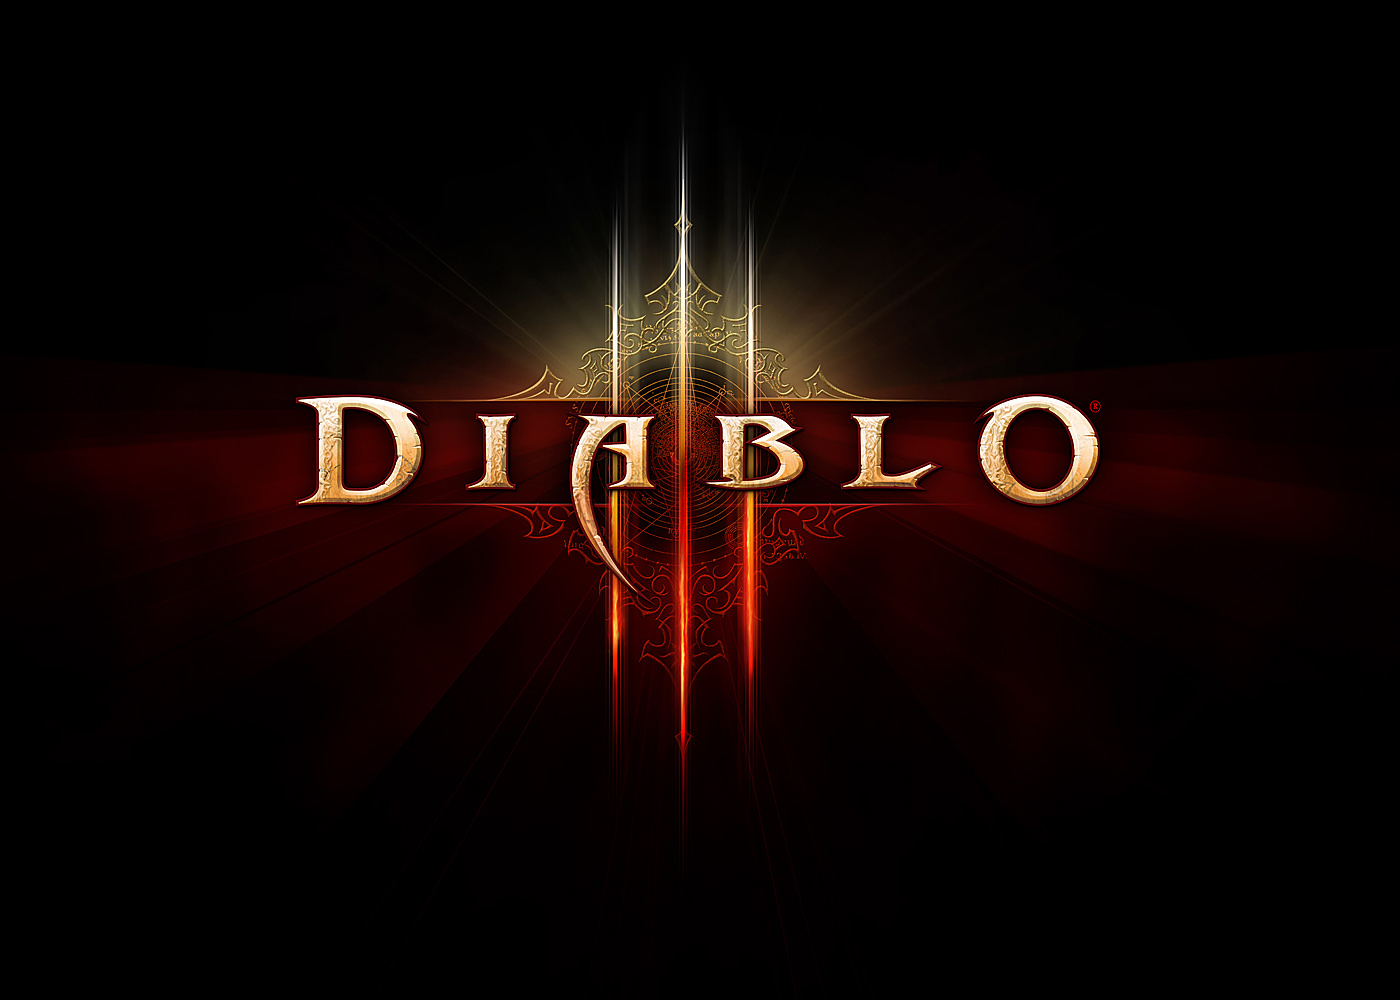 diablo 3 sweep attack or blessed hammer 2.4